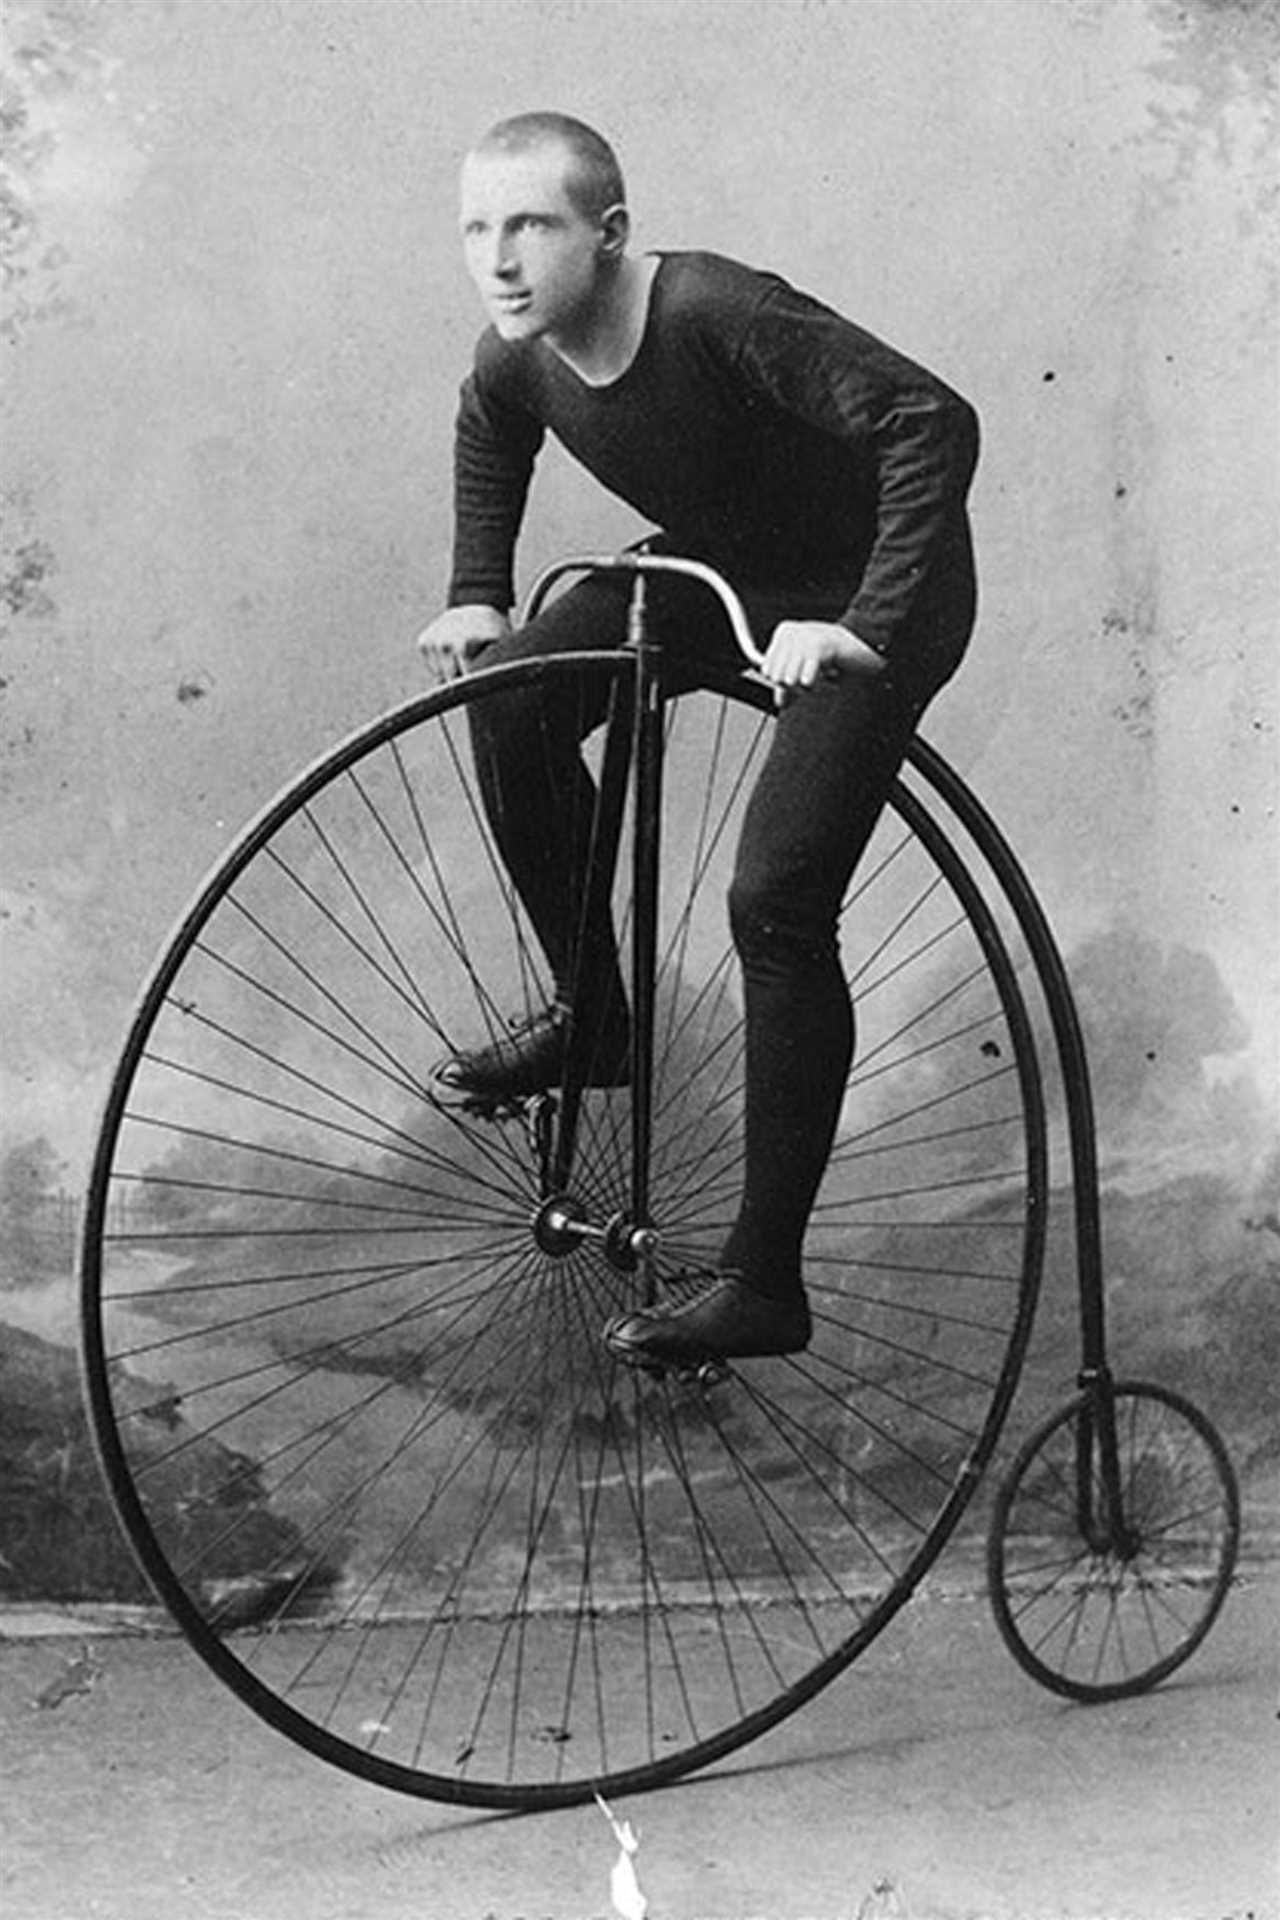 Bicycles as a Mode of Transportation